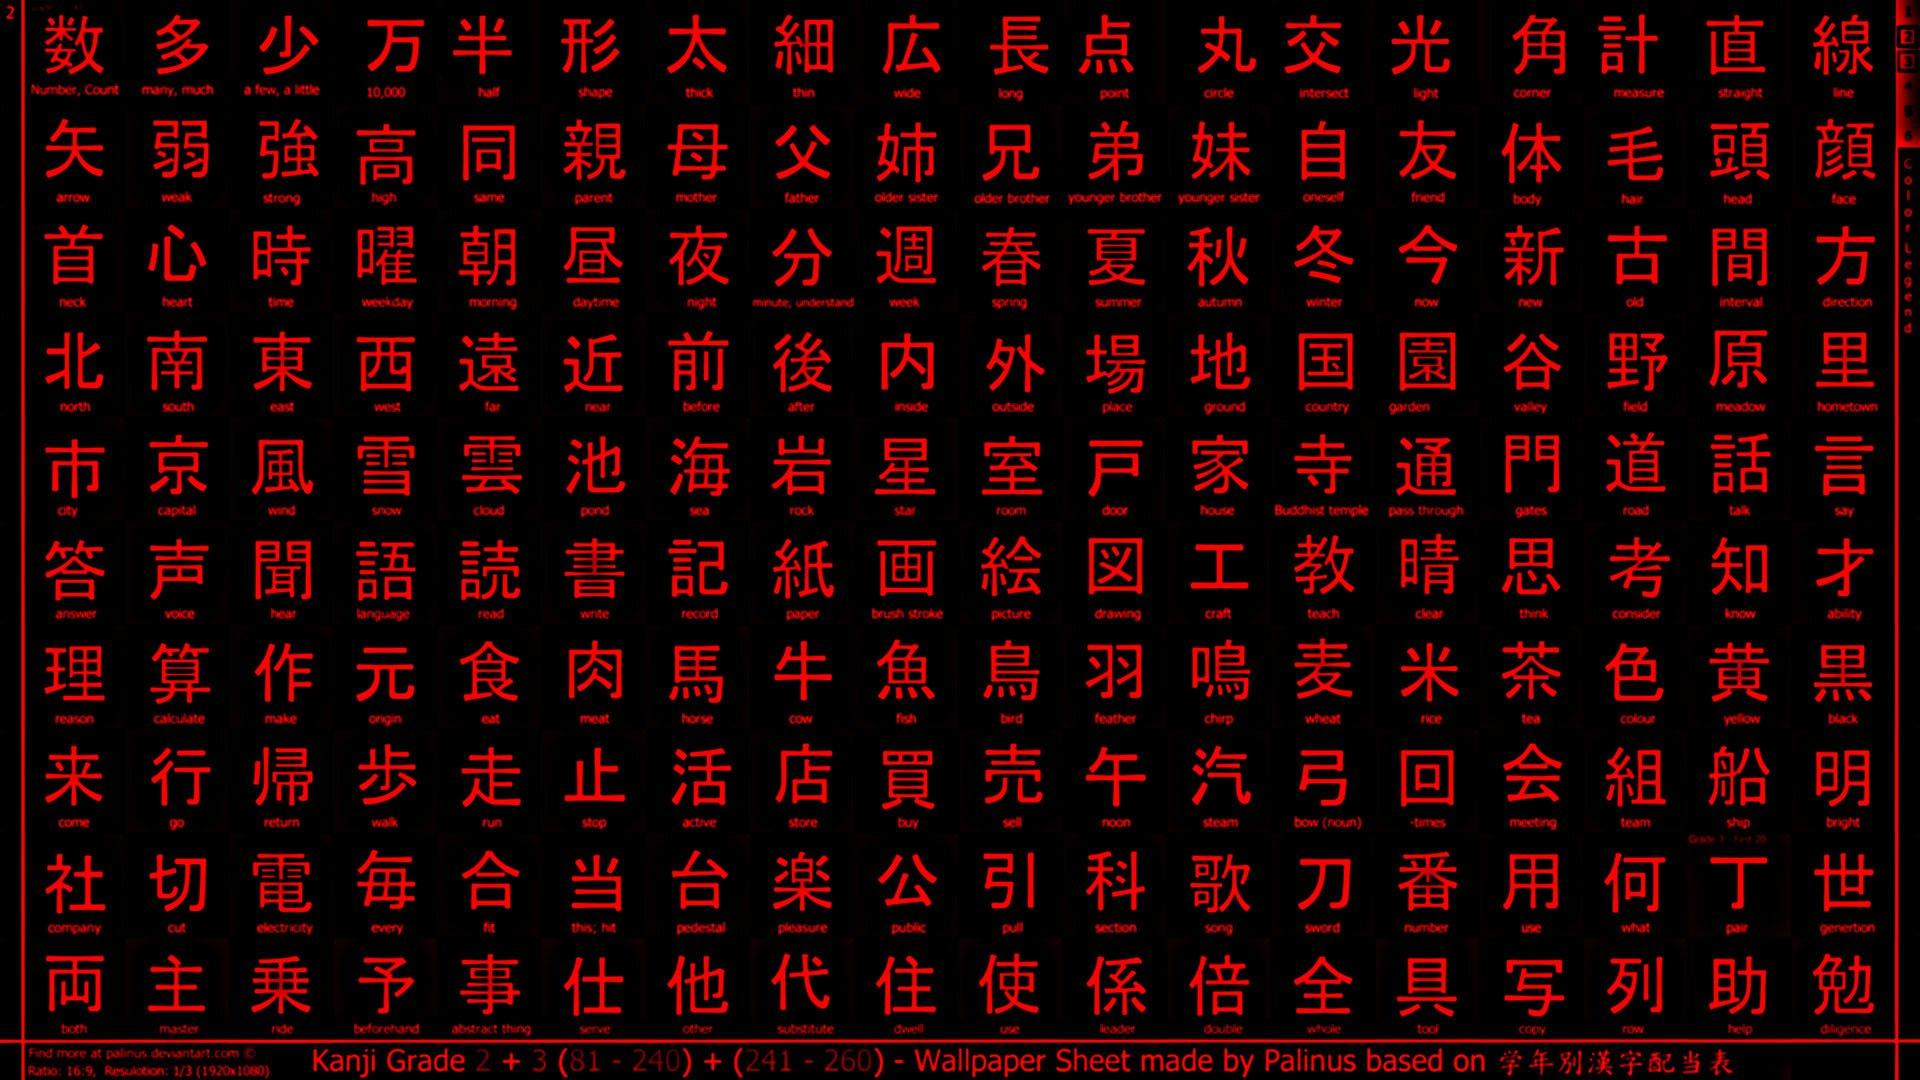 My new wallpaper is helping me a lot learning kanji. What do